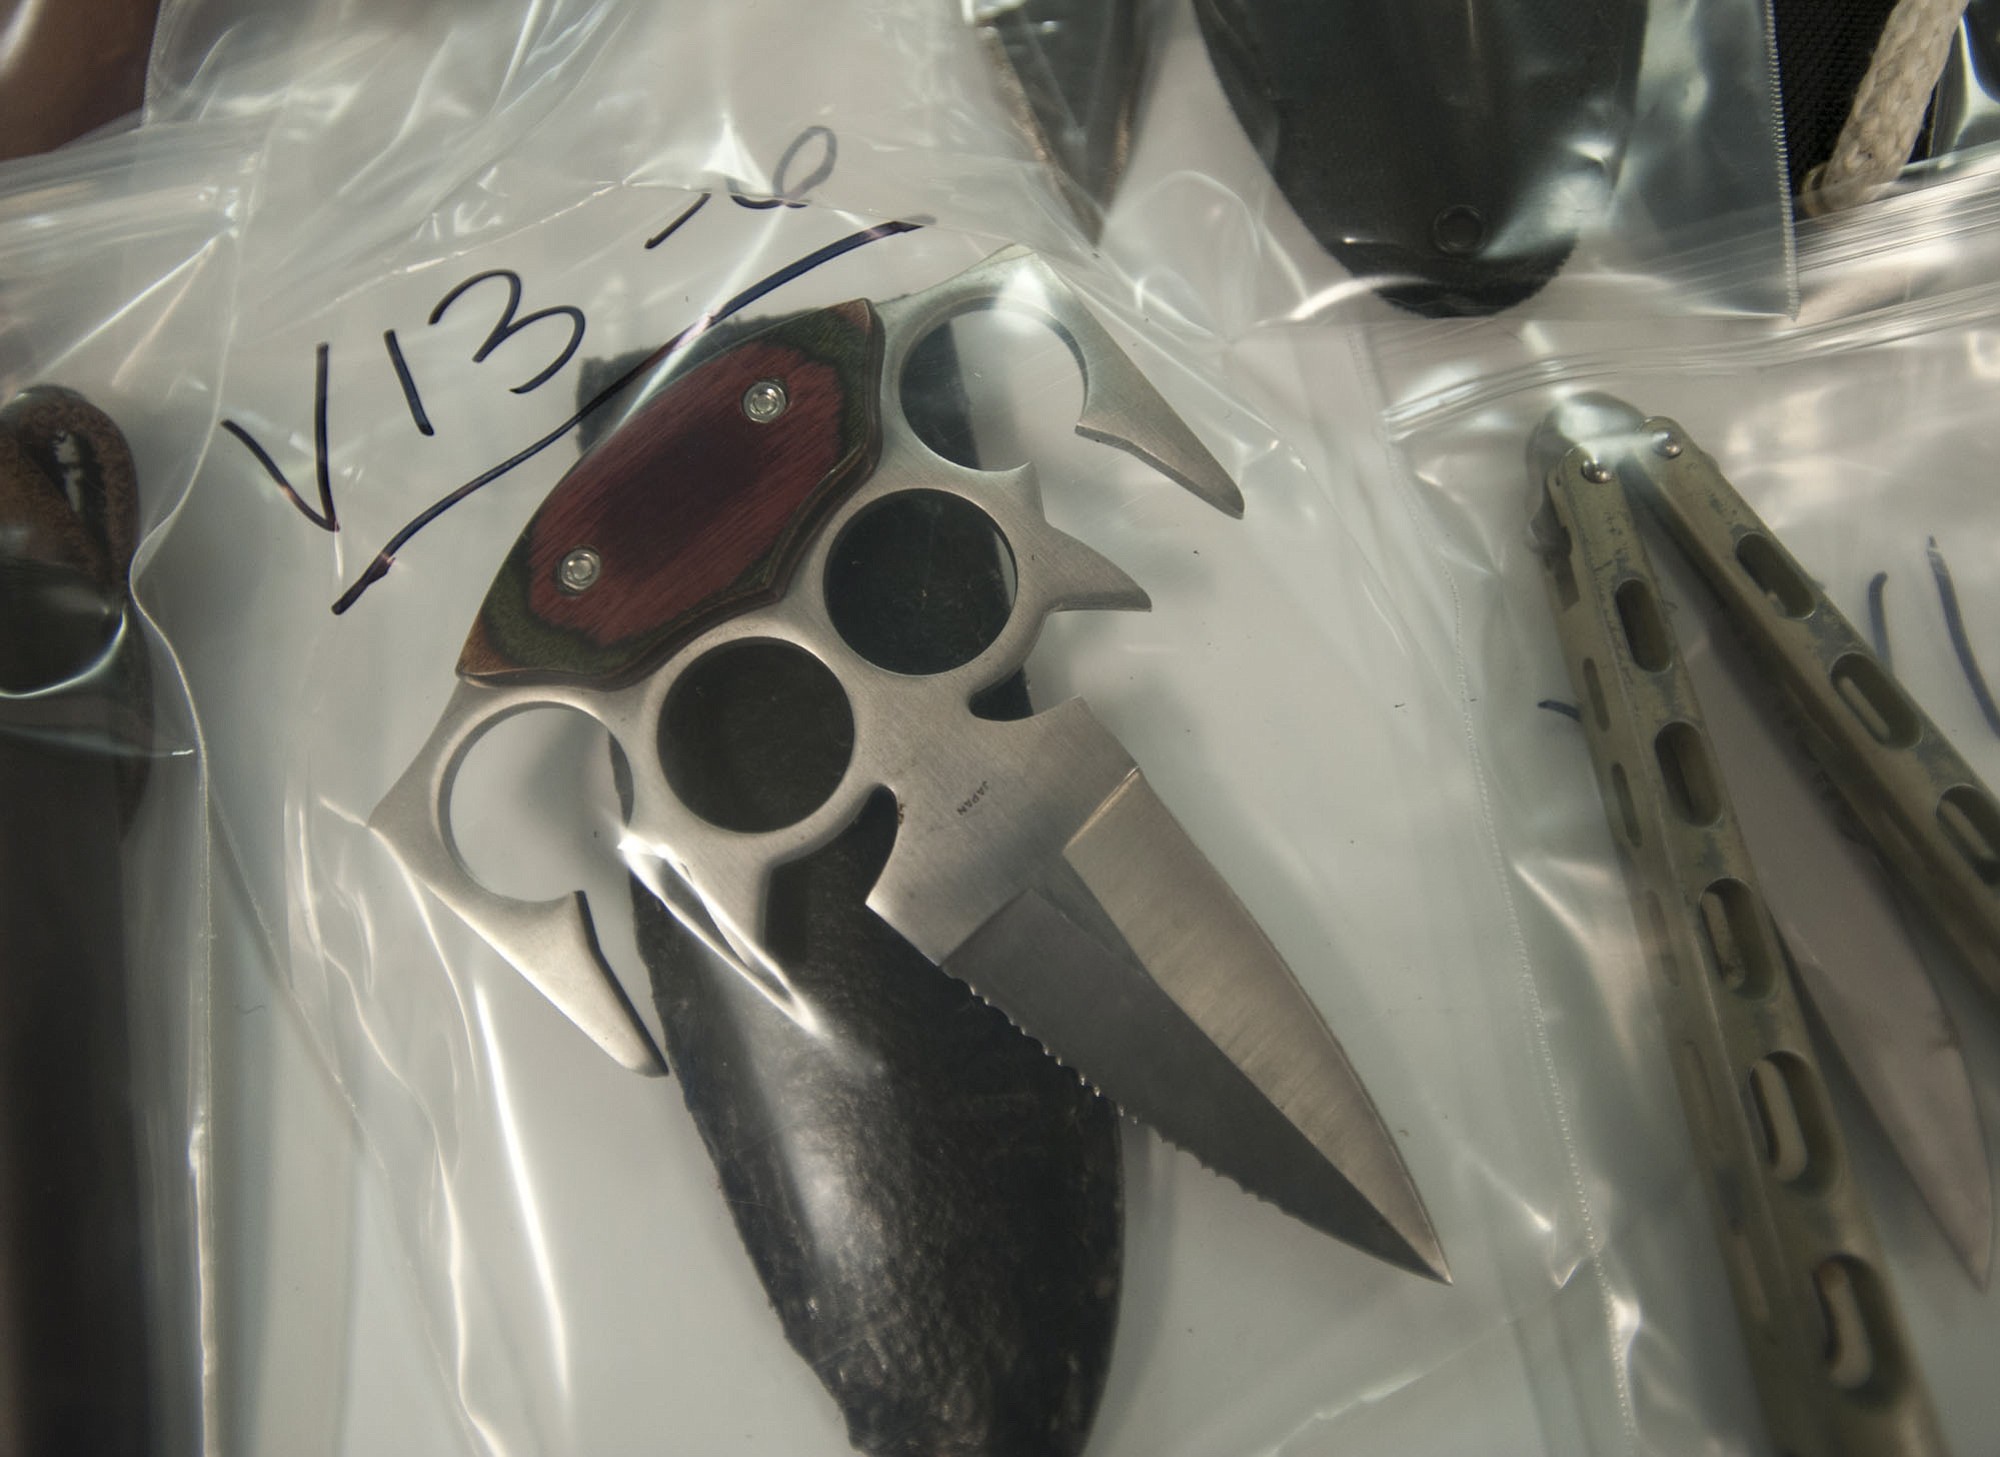 A brass knuckles knife sits among hundreds of packaged property that Vancouver police recovered during an investigation into a string of property crimes.